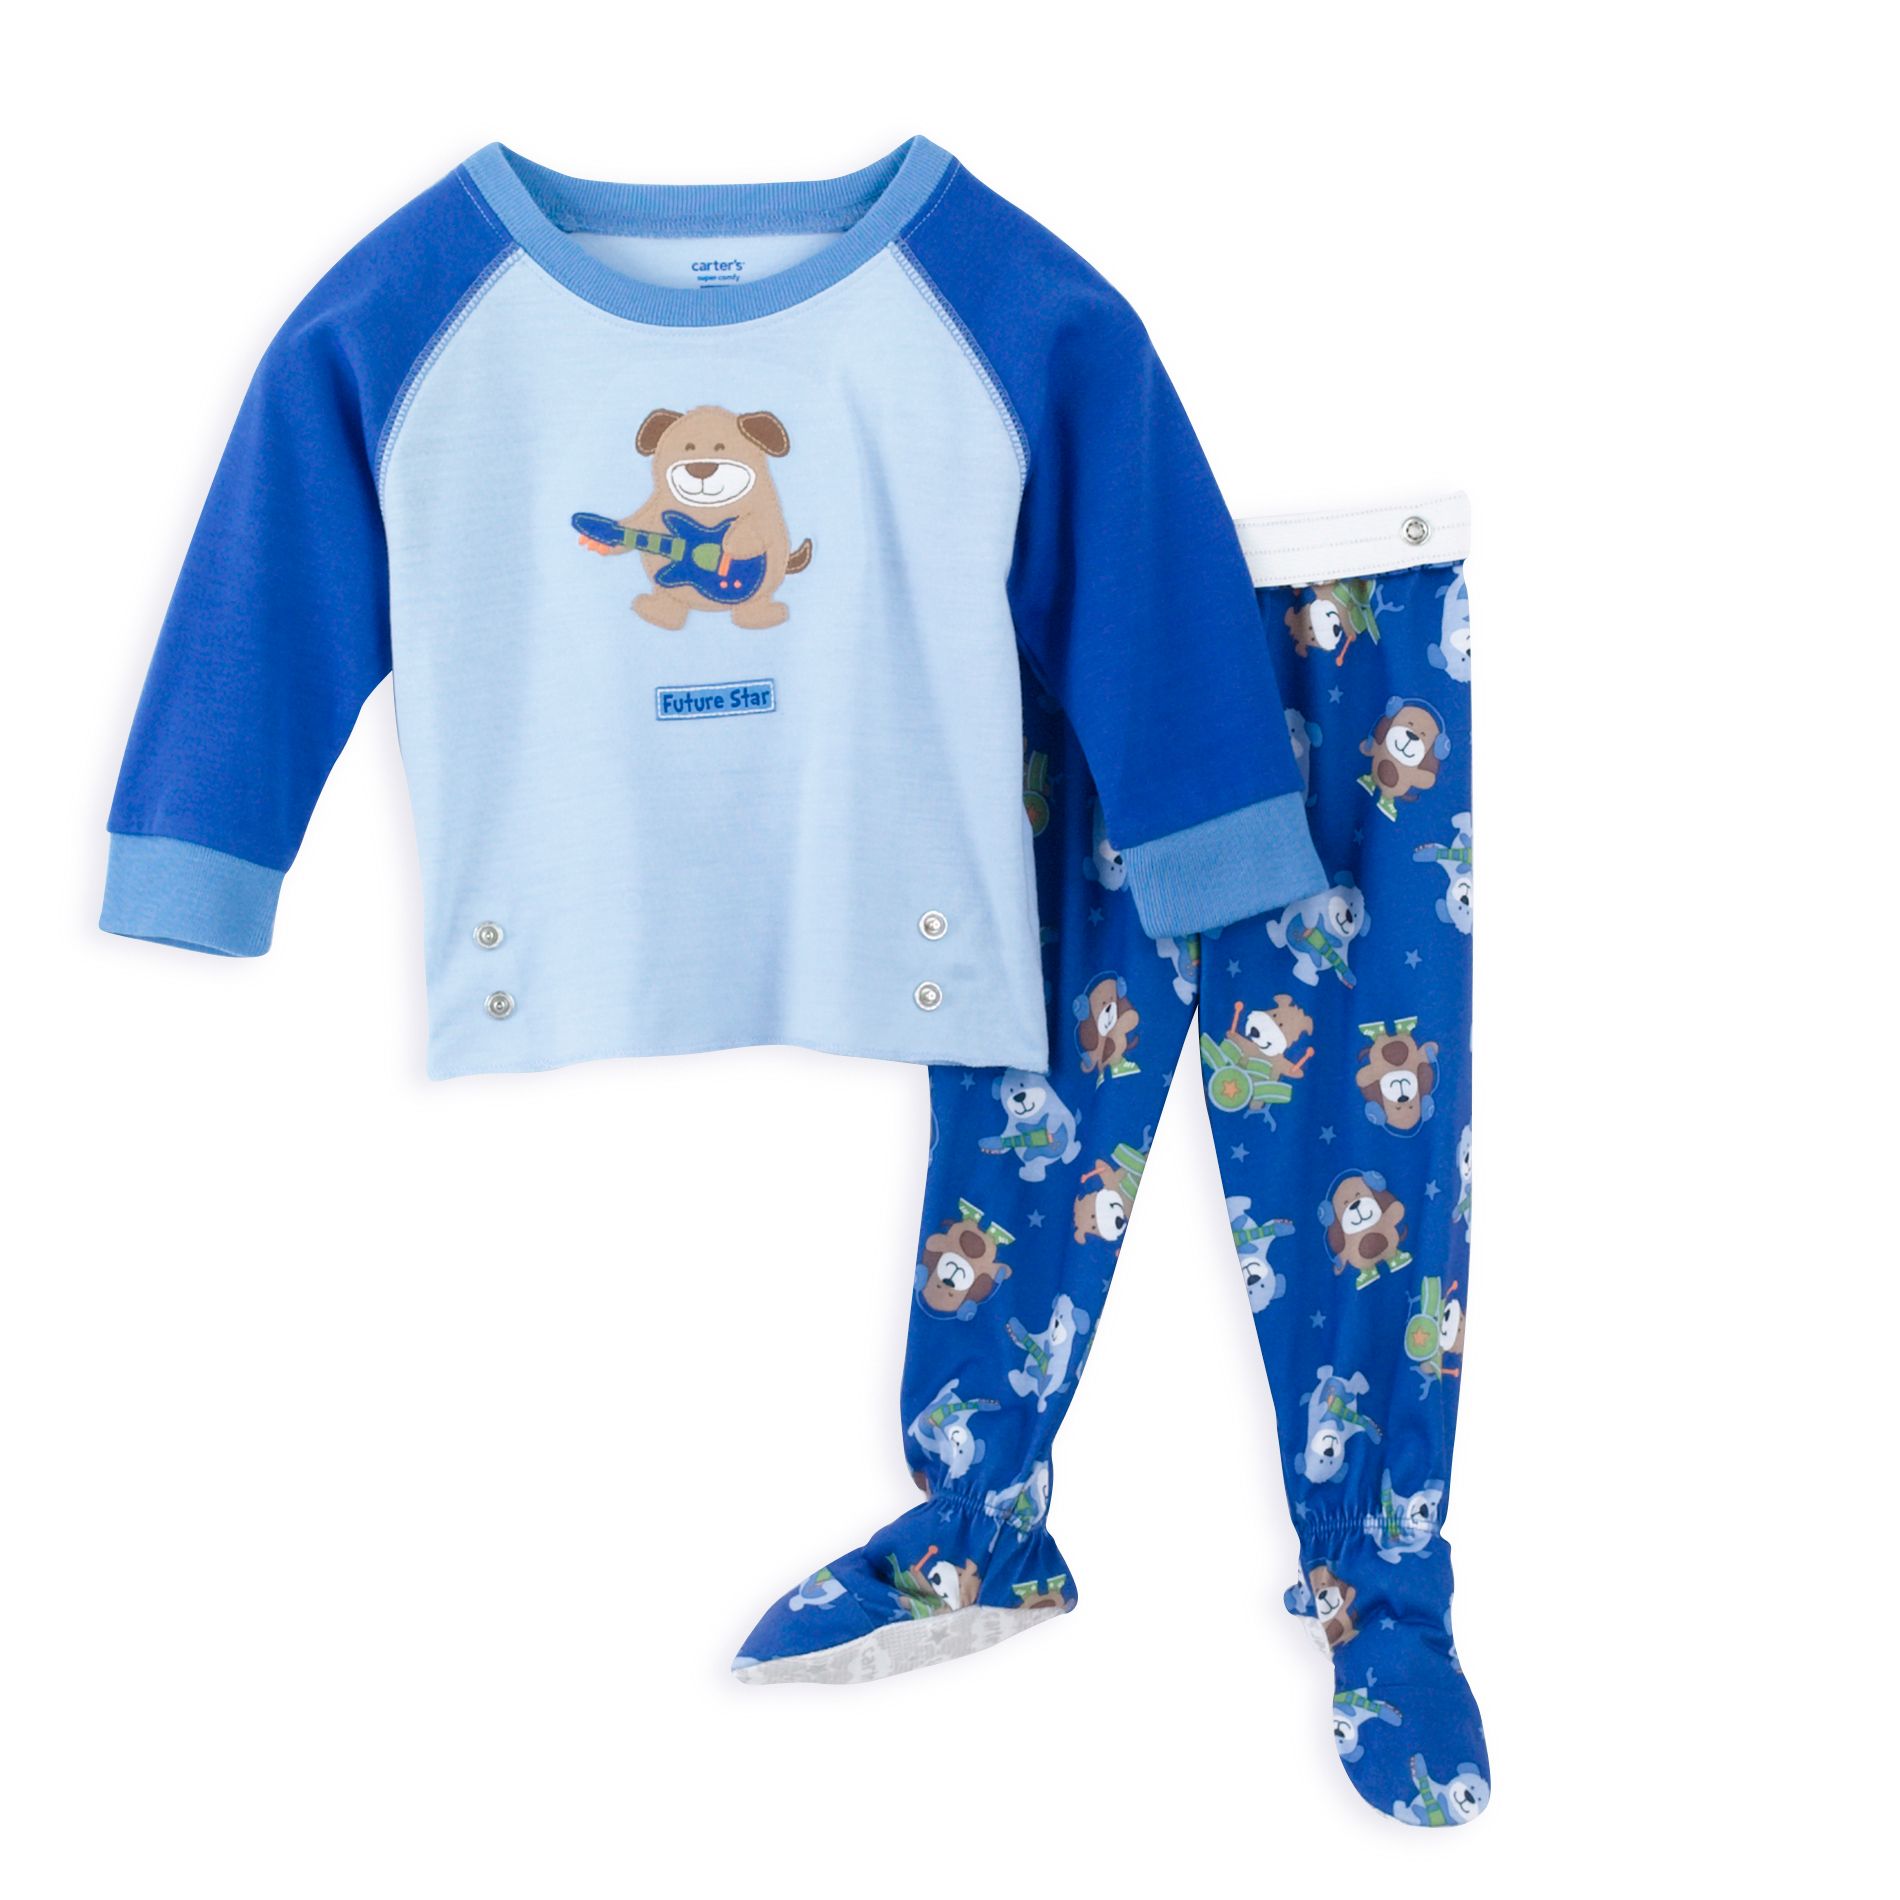 Carter's Infant Boy's 2Piece Snapwaist Footed Pajamas With Dog Print